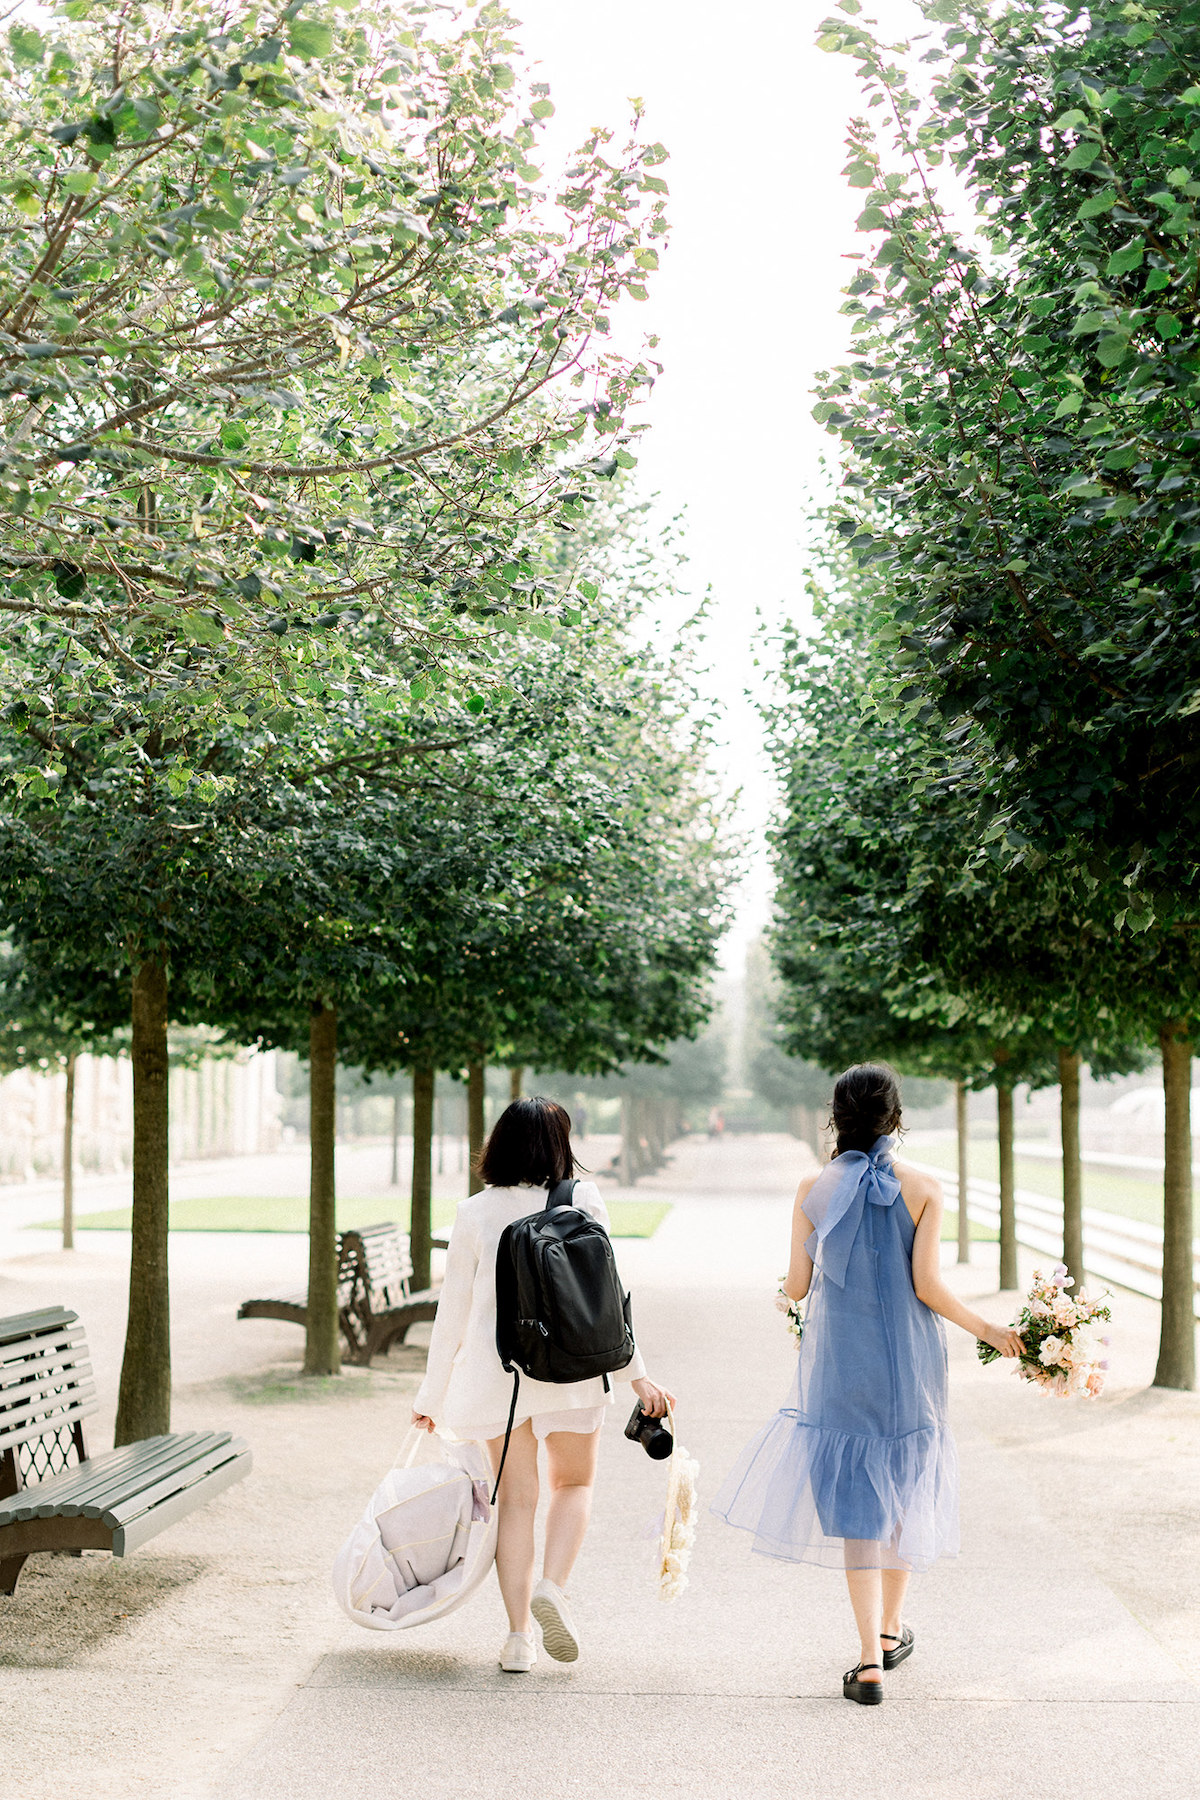 Behind-the-scenes moment as April Raymond and Karla collaborate to bring the editorial concept to life amid the lush backdrop of Longwood Gardens.